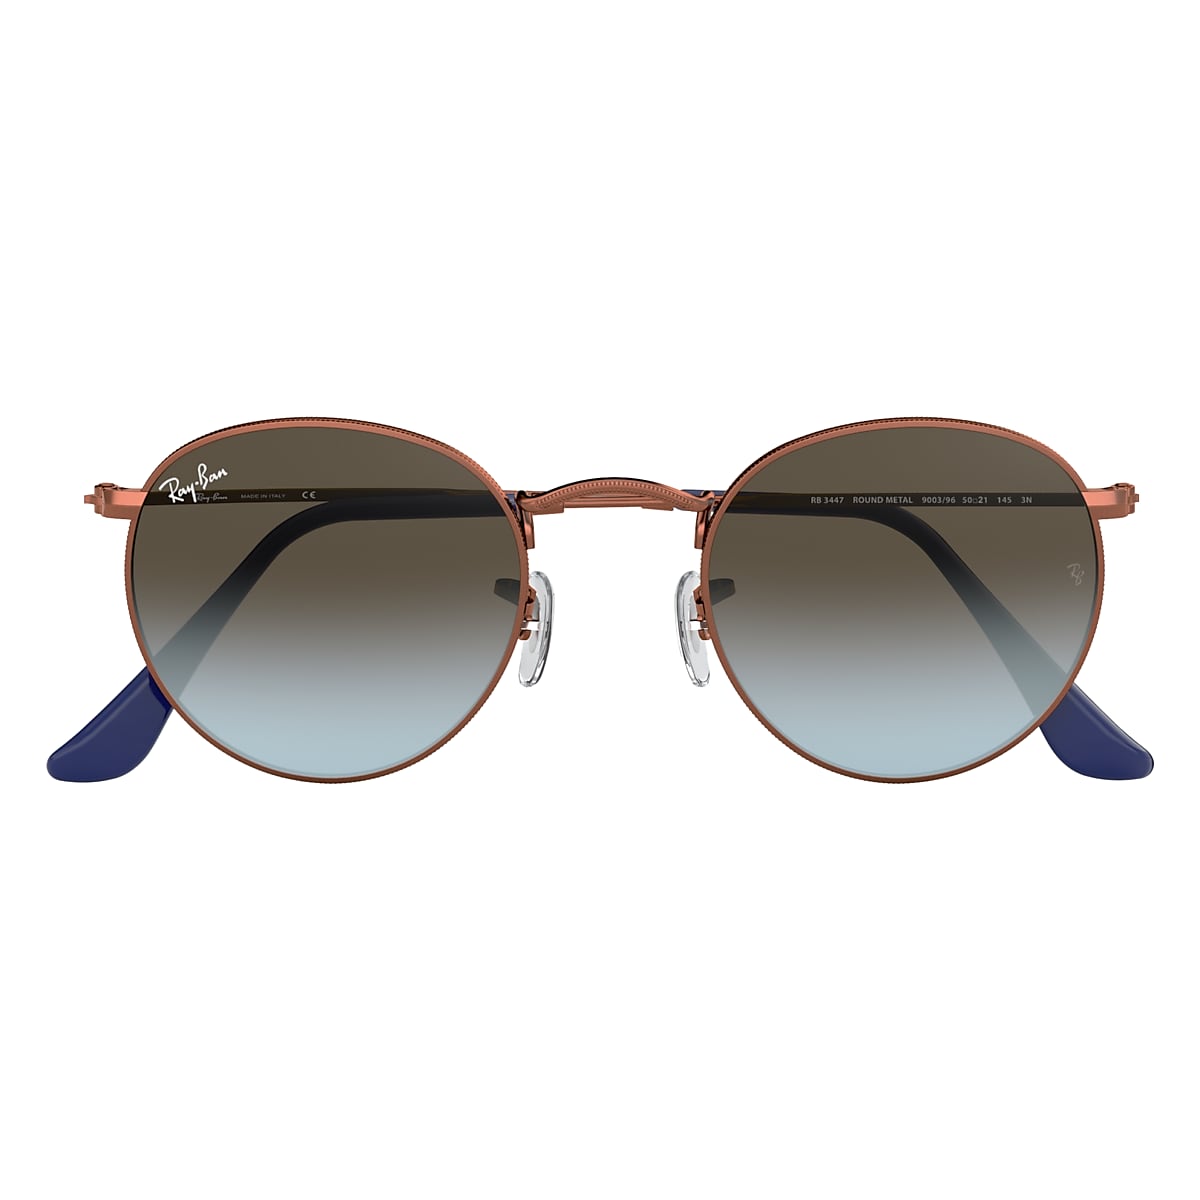 Round Metal Sunglasses Bronze-Copper and Blue/Brown |